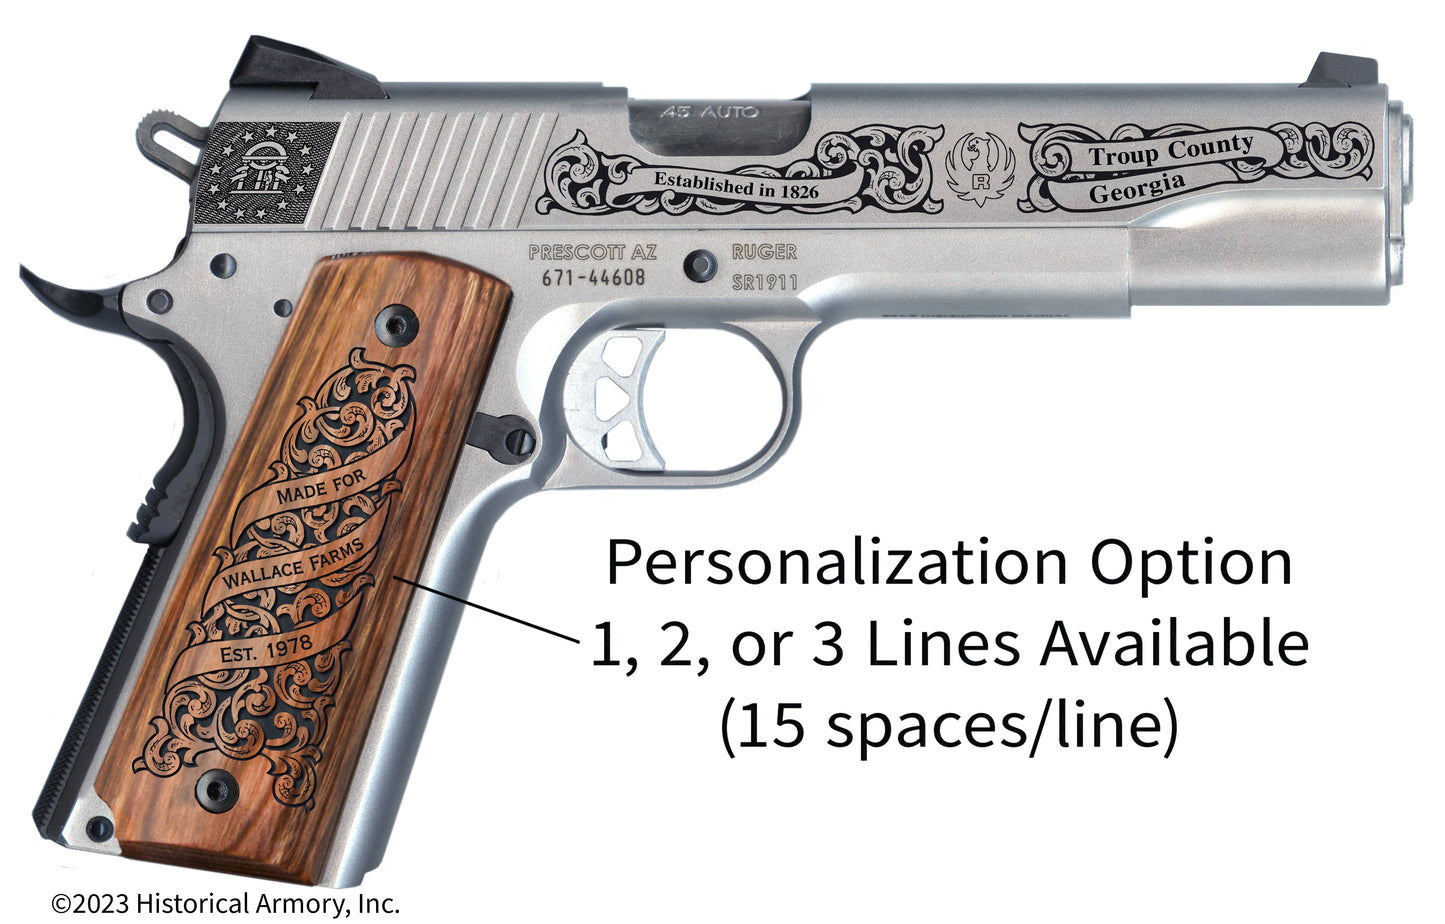 Troup County Georgia Personalized Engraved .45 Auto Ruger 1911